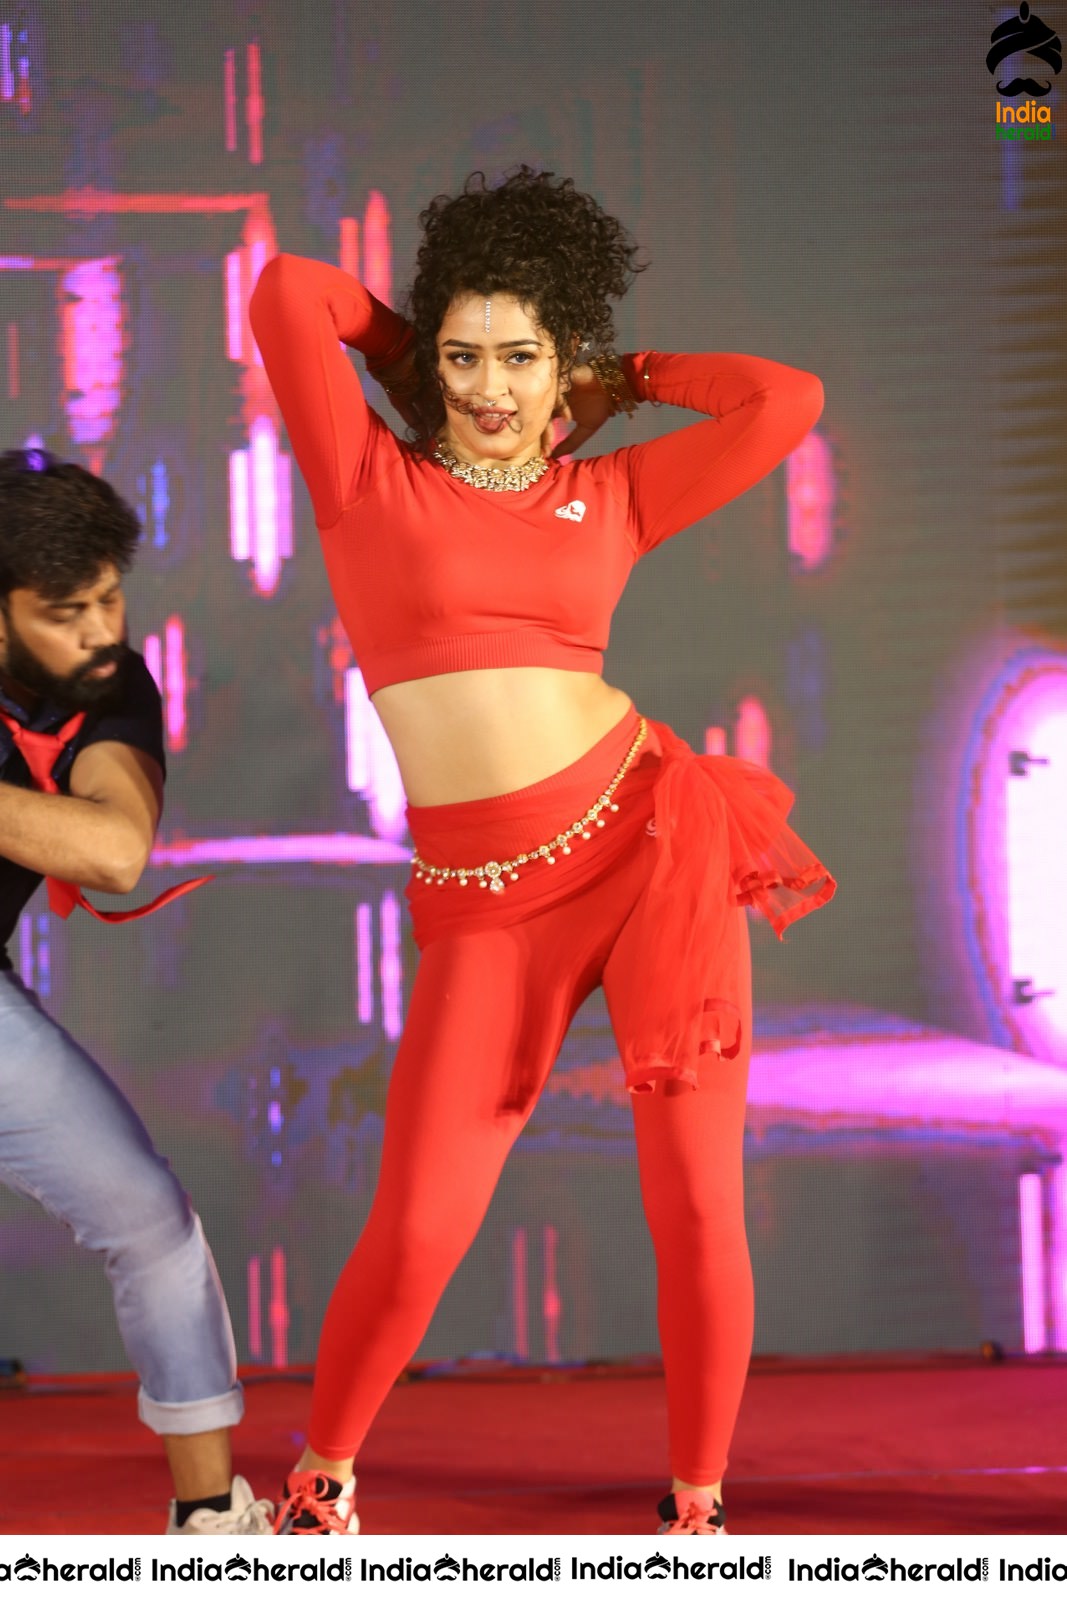 Hot Dance Performed On the Stage at Ullala Ullala Movie Event Set 2